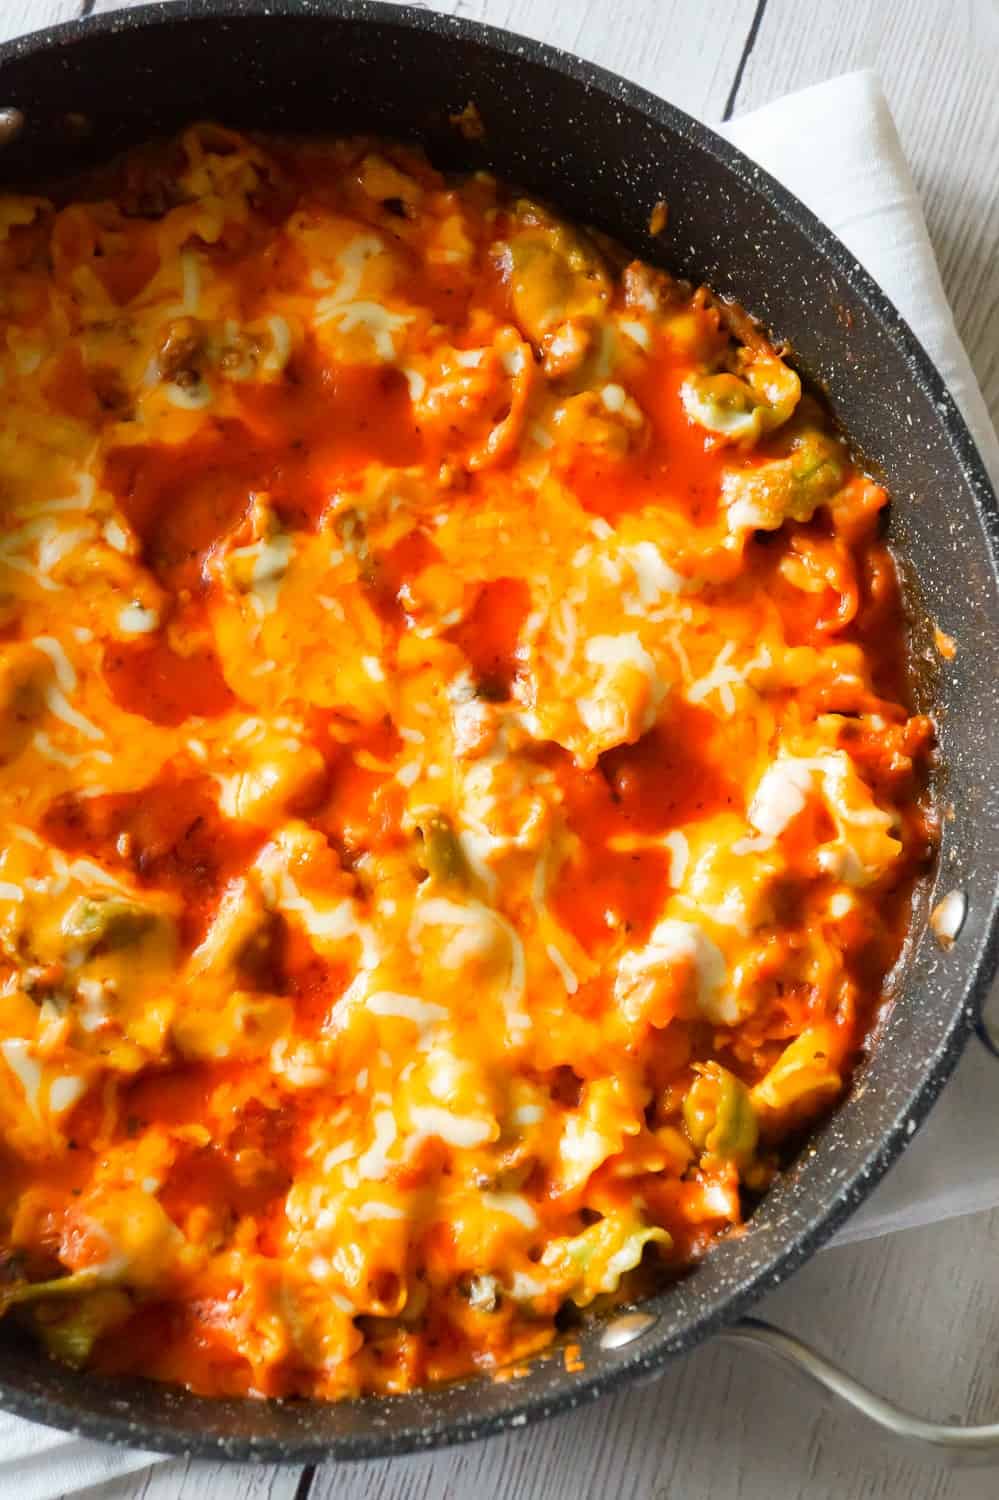 Cheesy Tortellini with Sausage is an easy one pot dinner recipe loaded with ground sausage meat and topped with mozzarella and cheddar cheese.